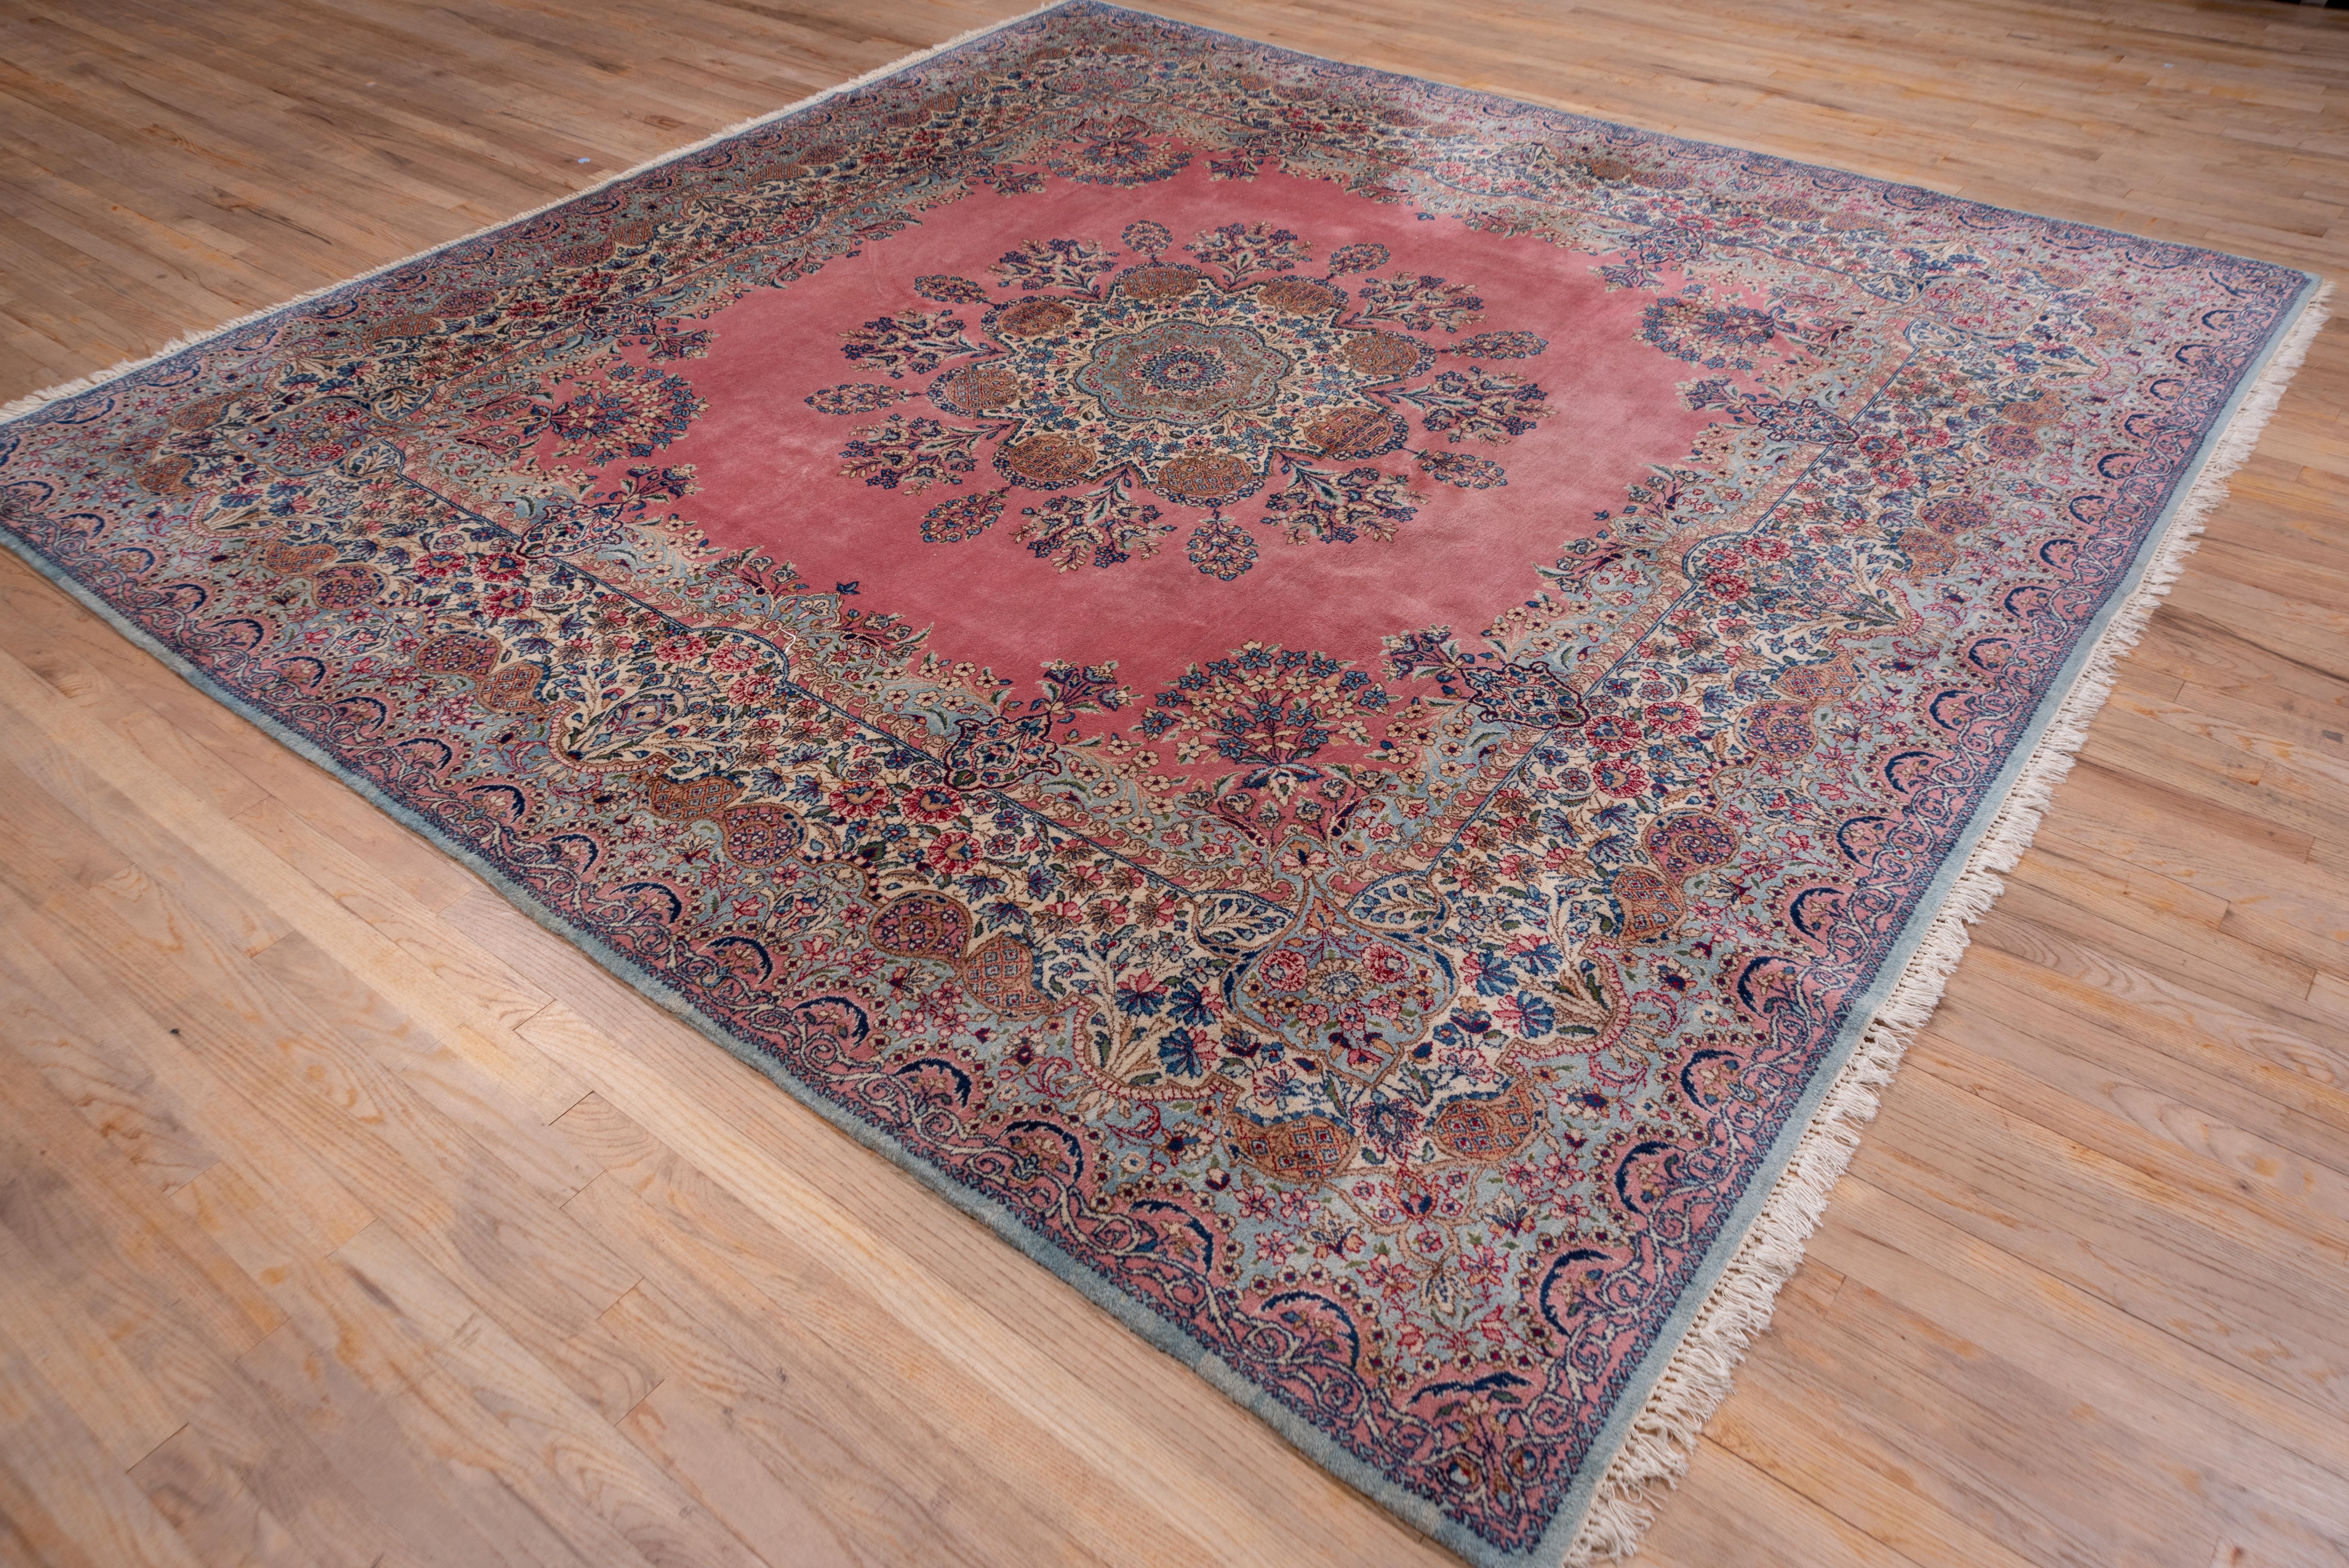 Square Antique Kerman Carpet In Excellent Condition For Sale In New York, NY